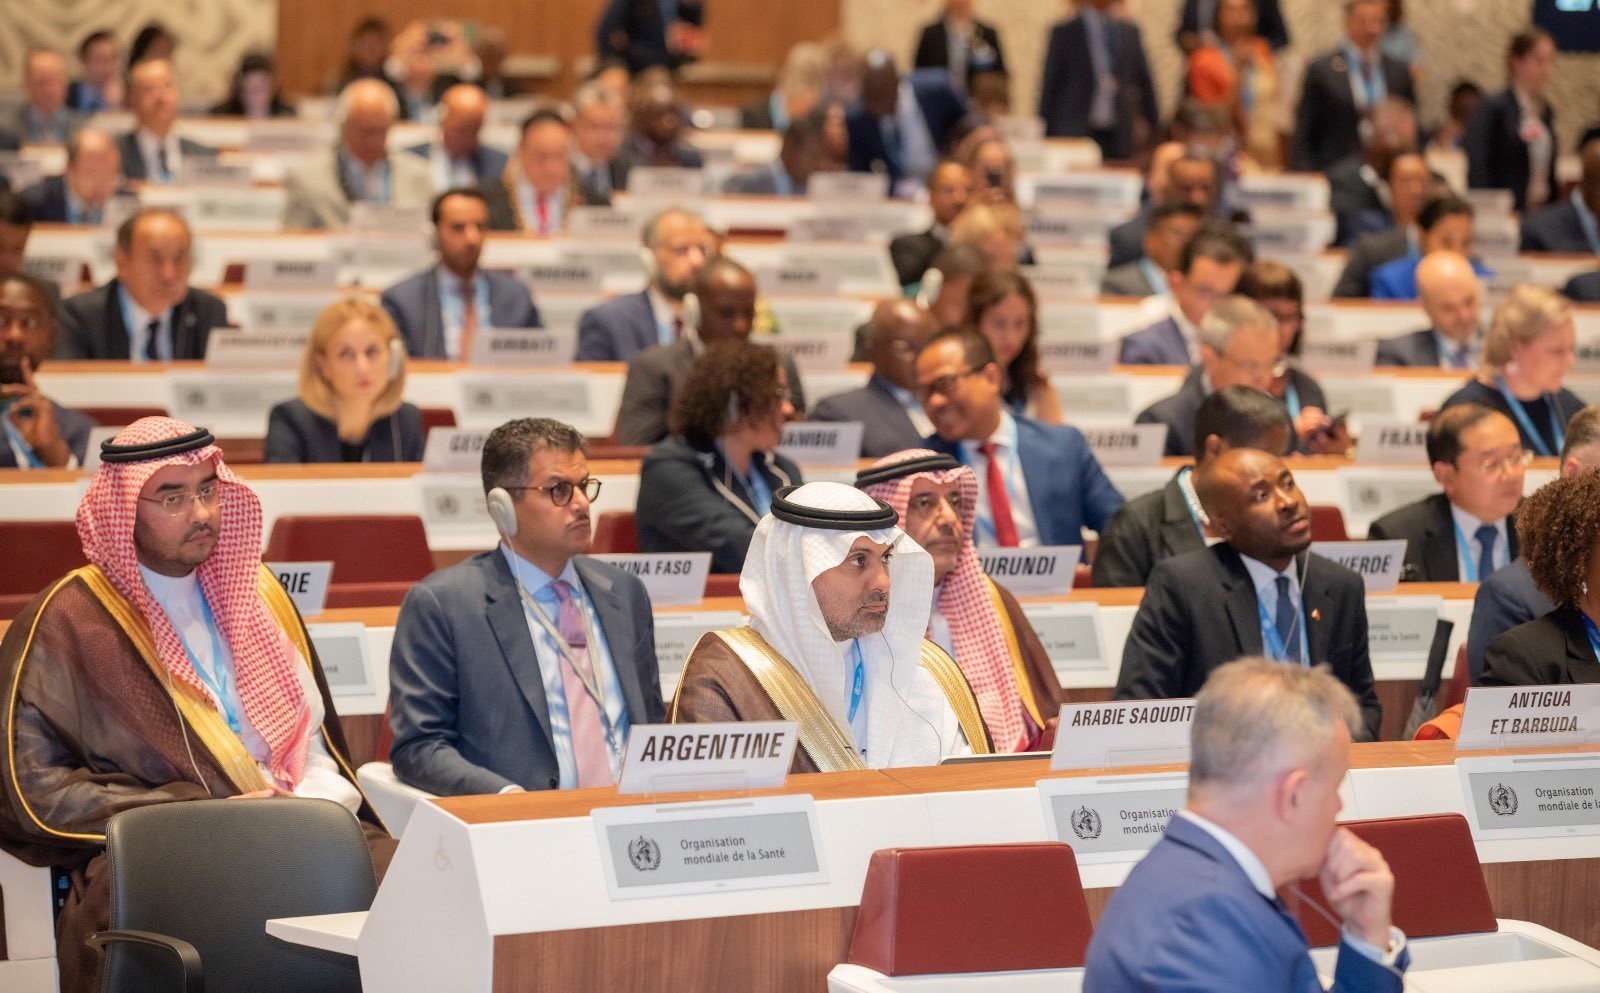 Saudi Minster of Health: The Kingdom Stresses Need to Achieve Global Health and Wellbeing